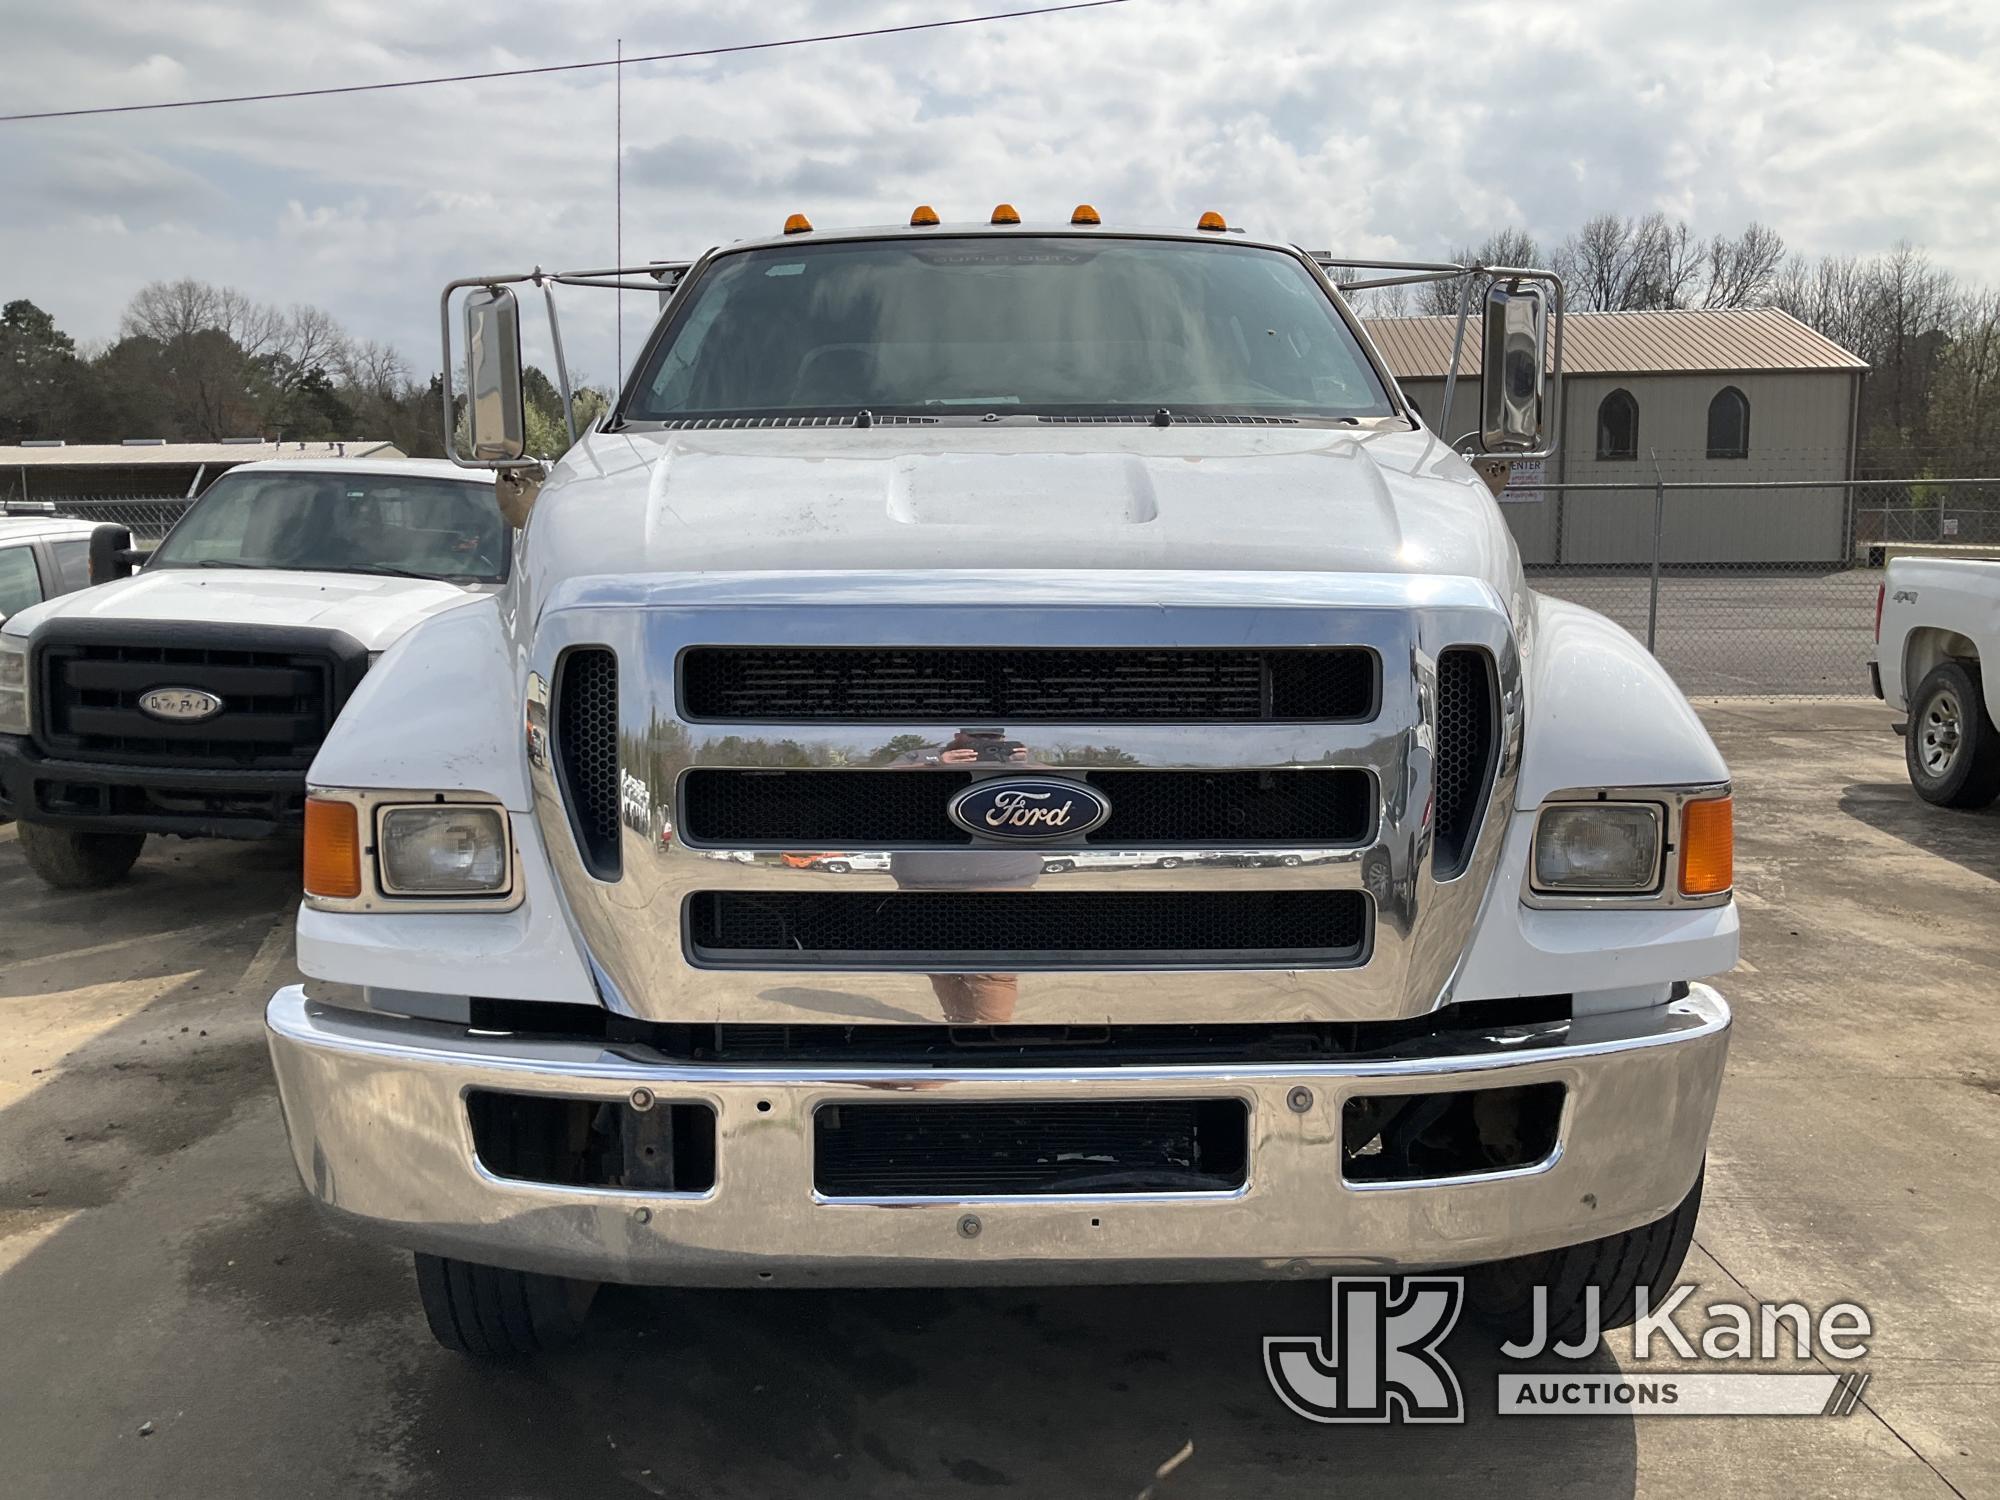 (Conway, AR) 2011 Ford F750 Crew Cab Chipper Dump Truck Not Running, Condition Unknown, Missing Batt